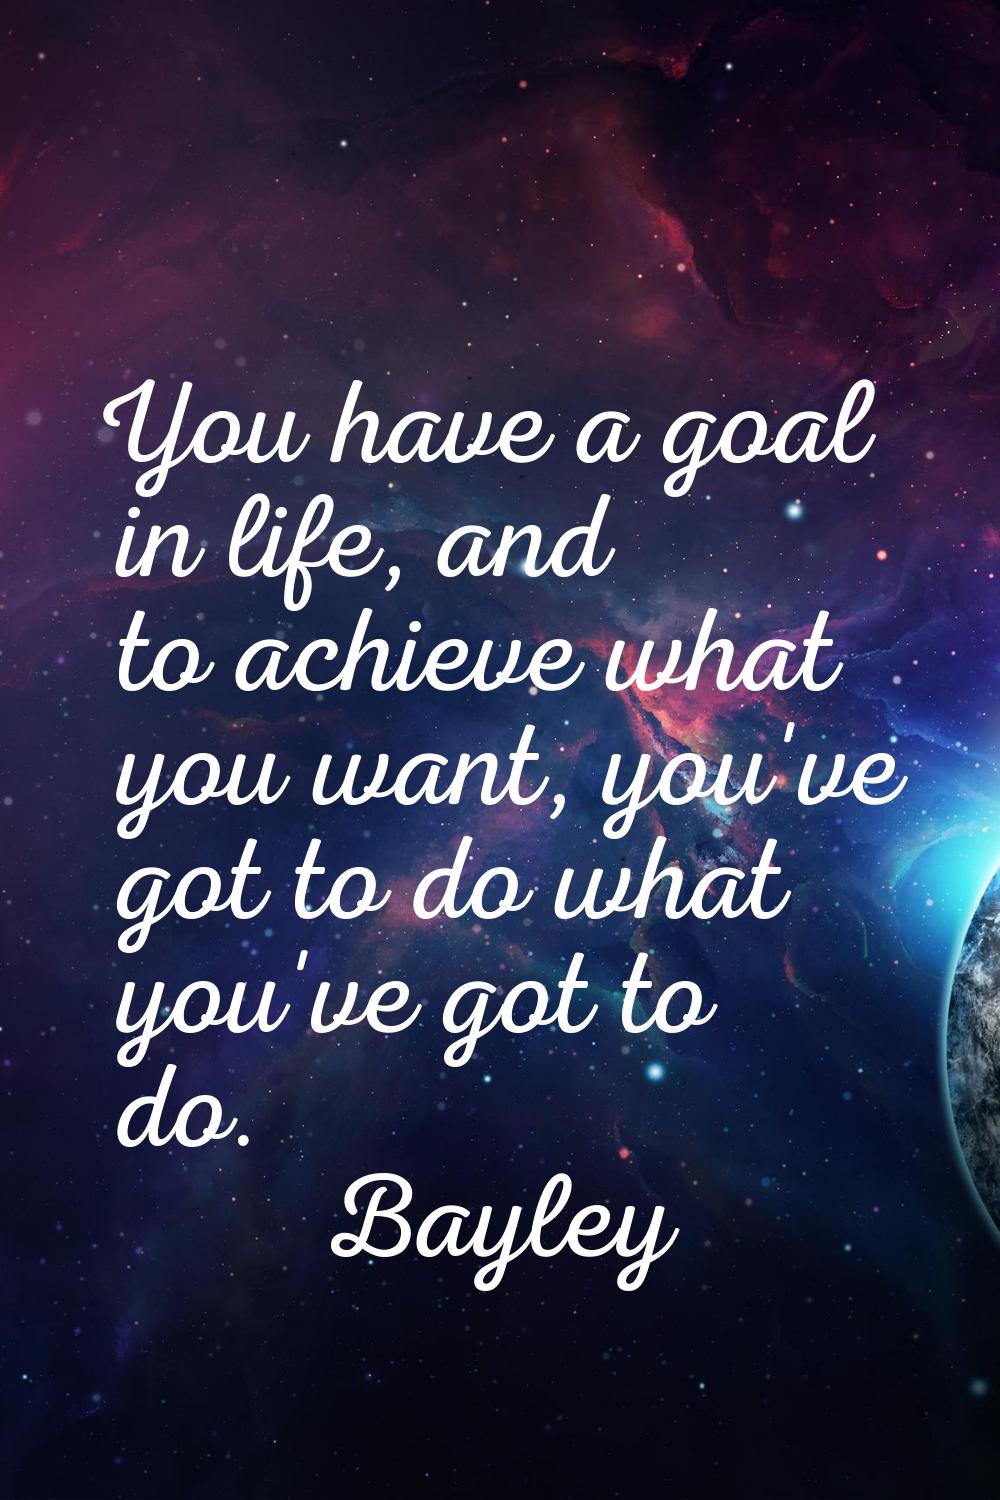 You have a goal in life, and to achieve what you want, you've got to do what you've got to do.